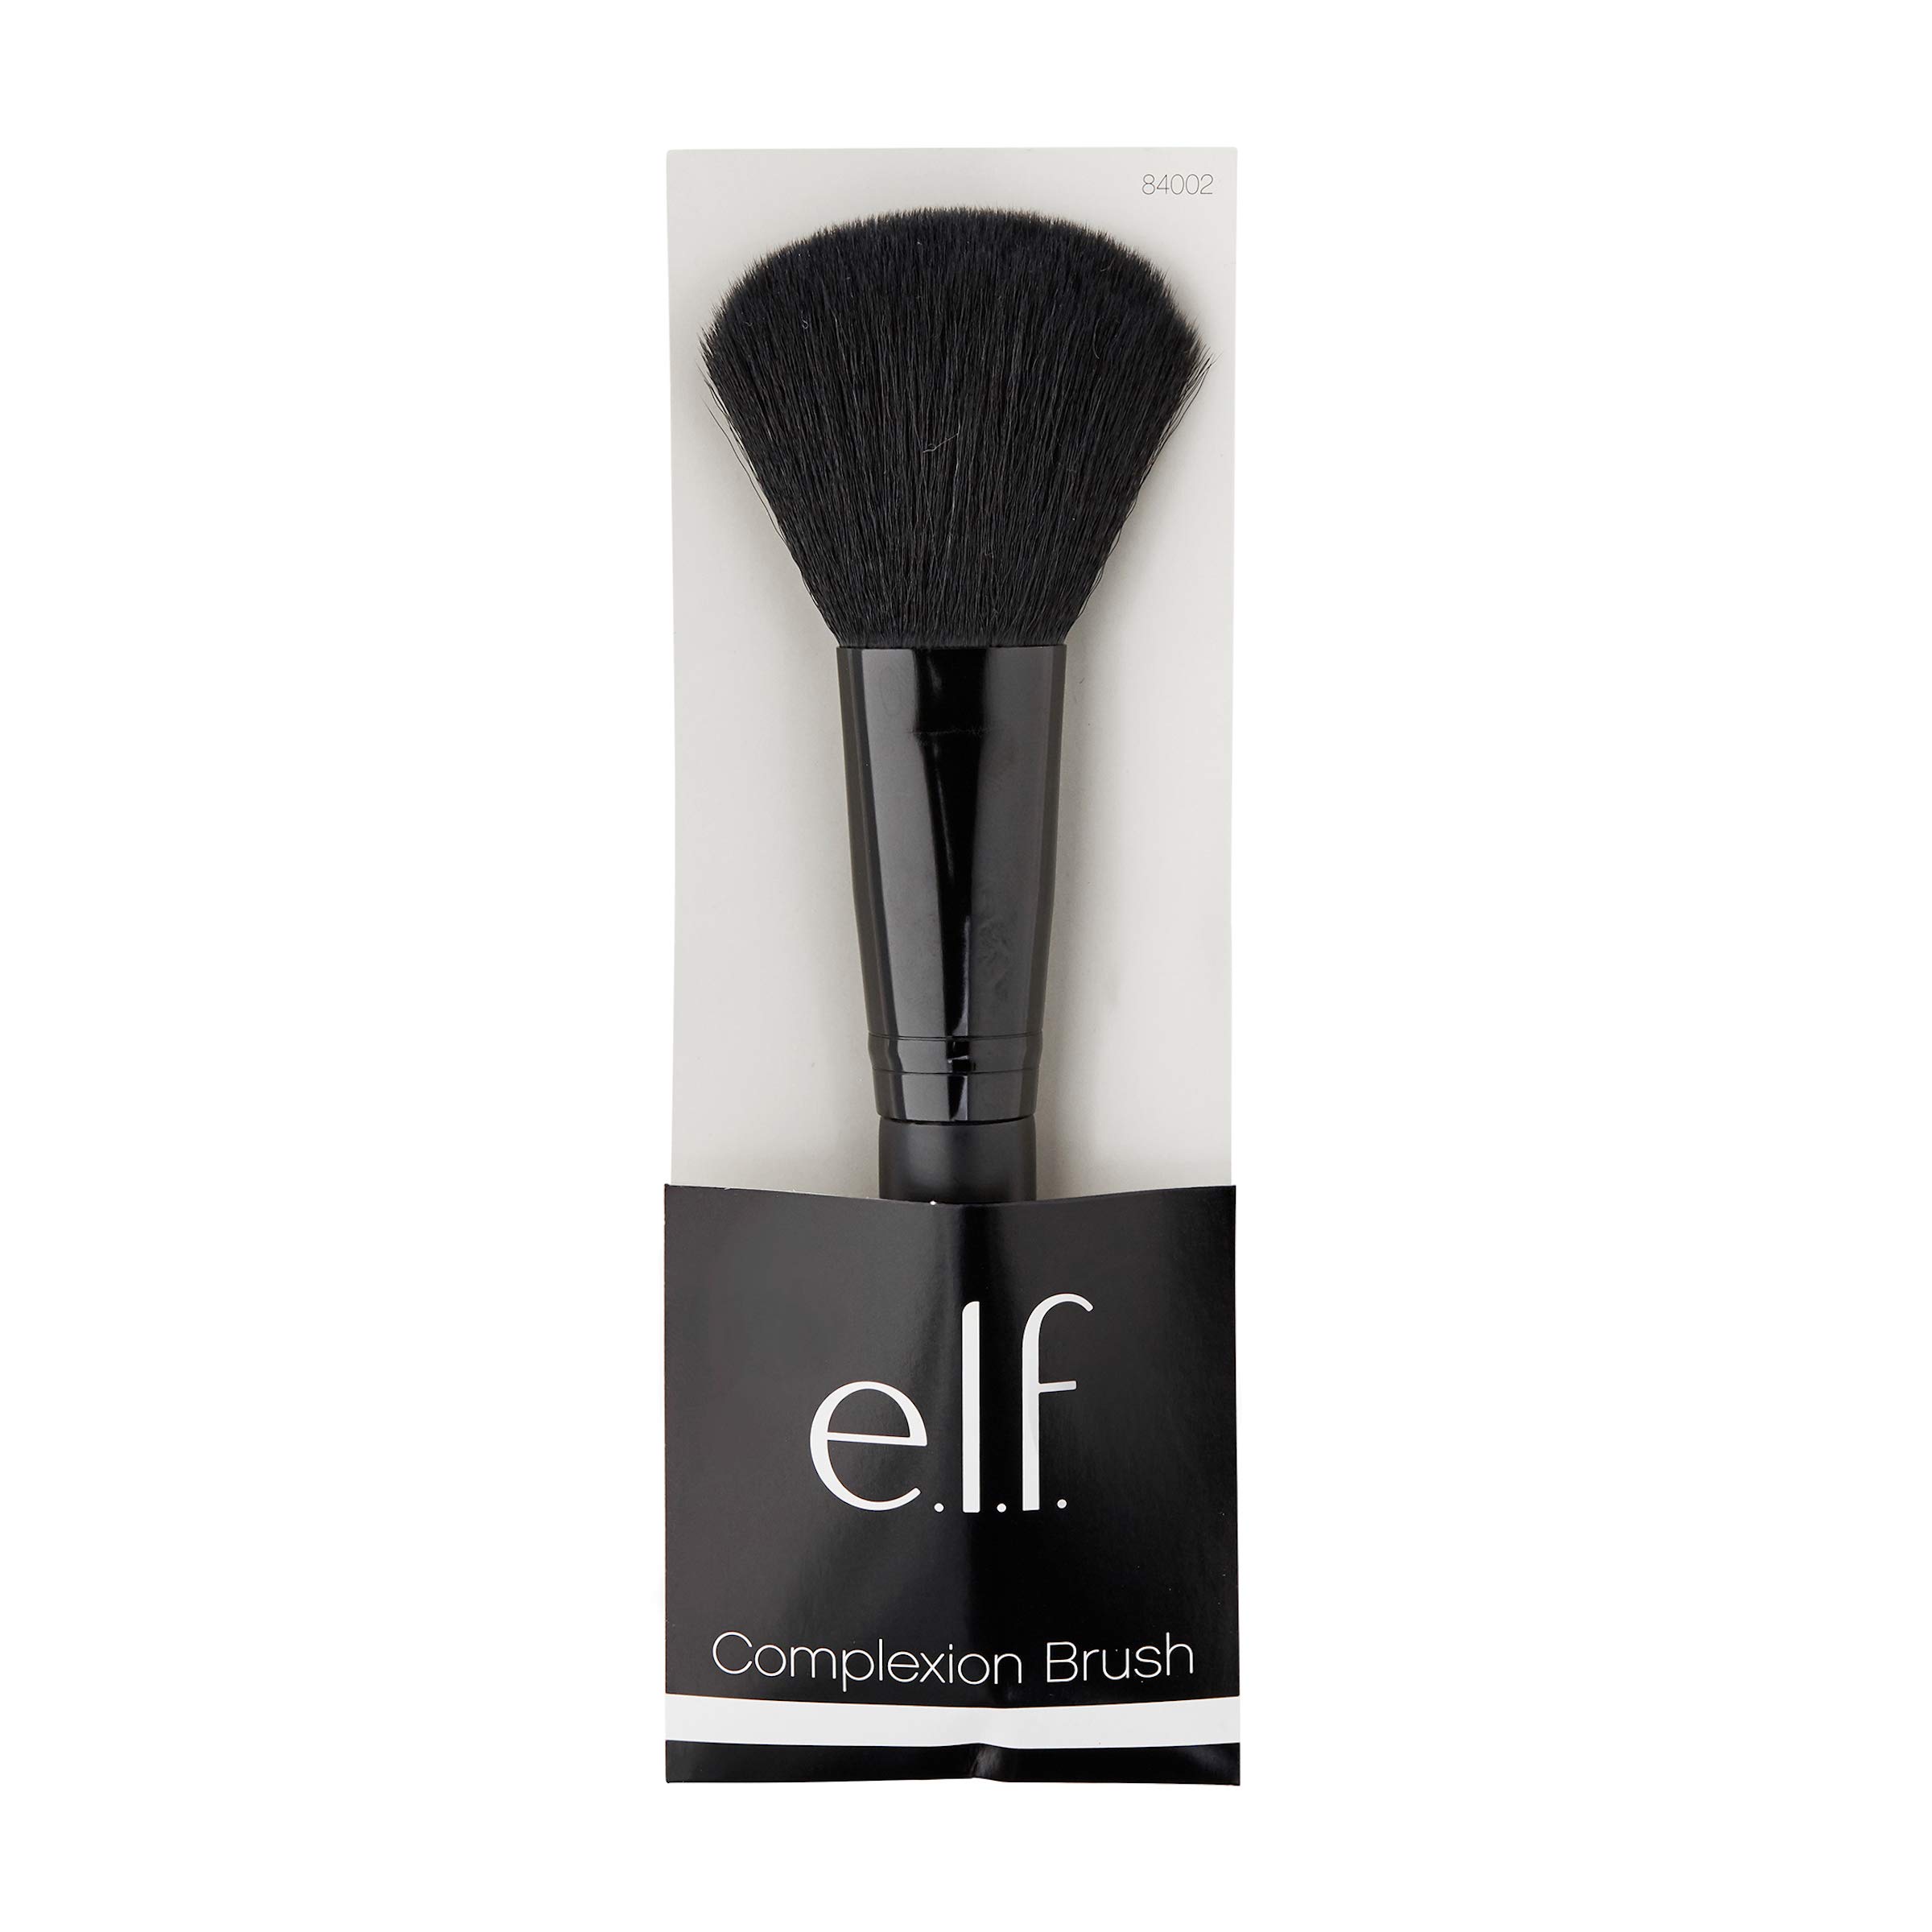 e.l.f. Cosmetics Complexion Brush for Flawless Makeup Application, Cruelty-Free Synthetic Taklon Brush